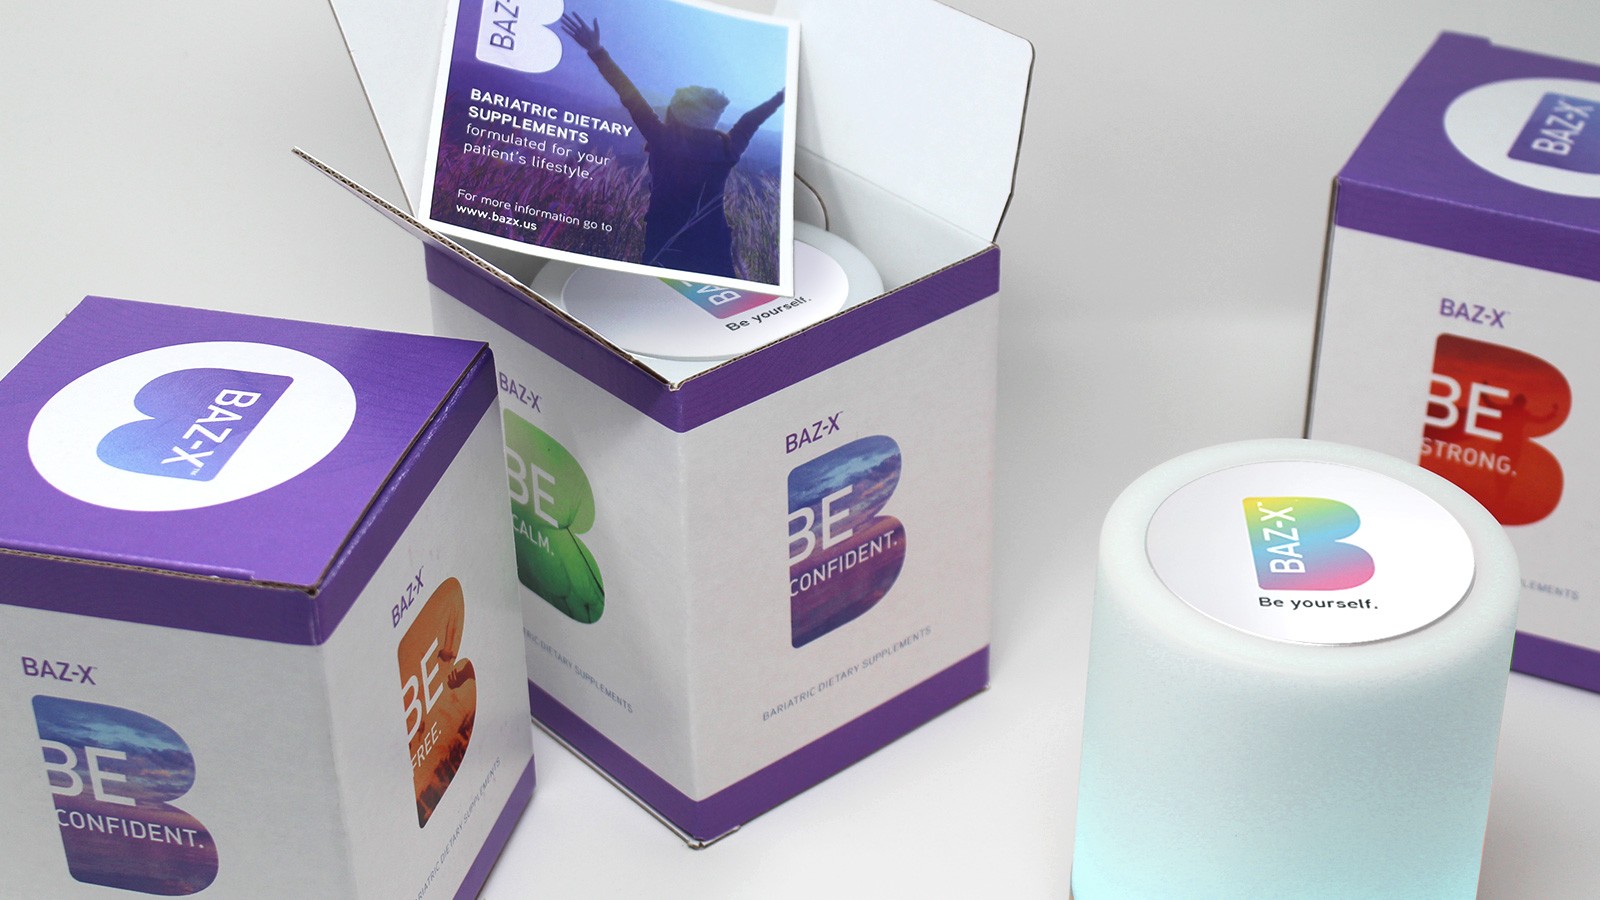 BAZ-X Bariatric Supplements | Gift Box Packaging and Lamp